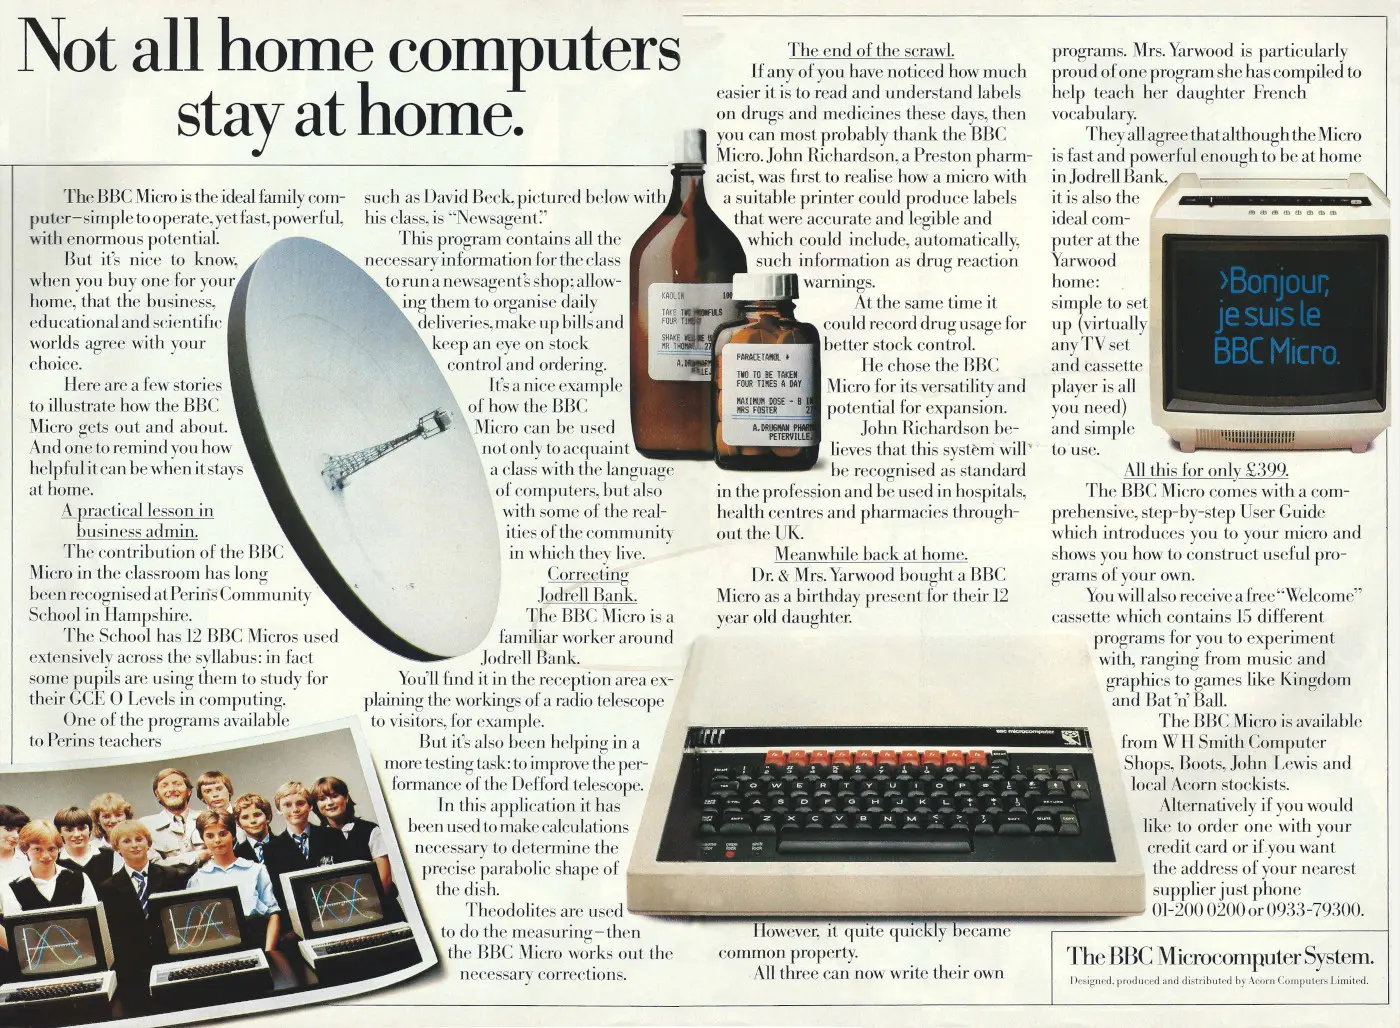 Acorn Advert: BBC Micro: Not all computers stay at home, from Personal Computer World, January 1984